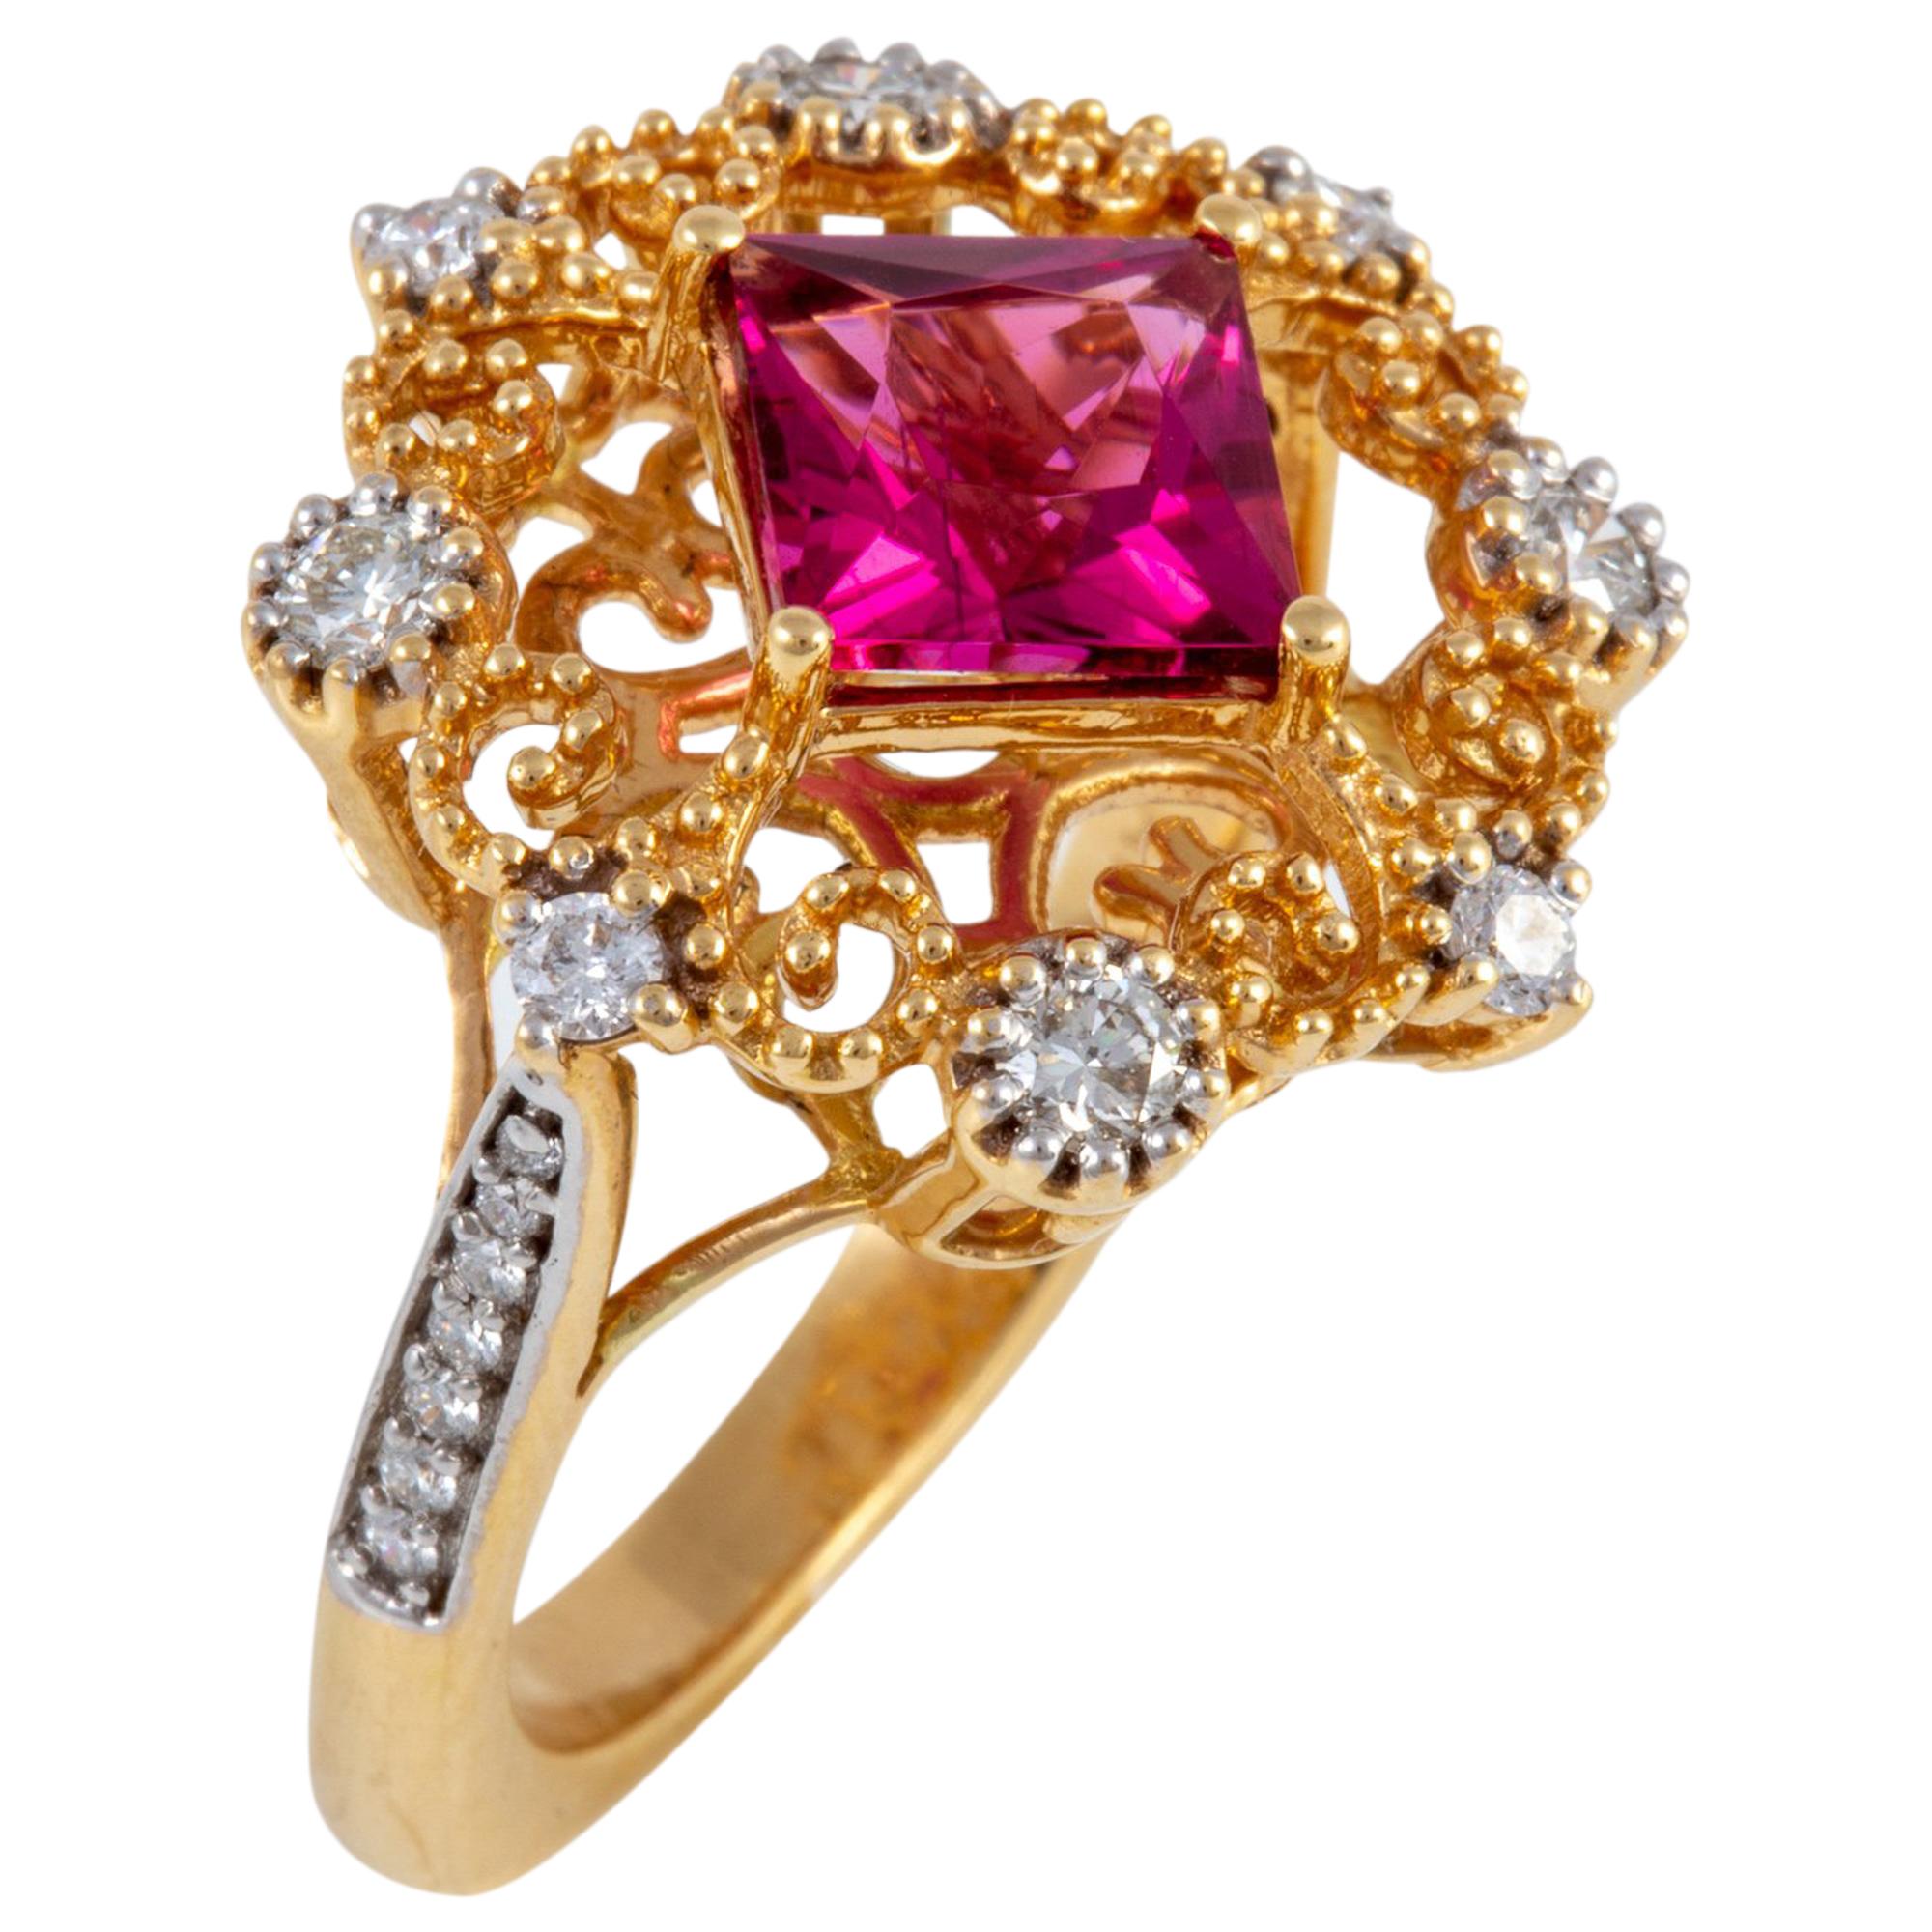 Rubellite Tourmaline and Diamond Ring set in 18 kt Gold For Sale